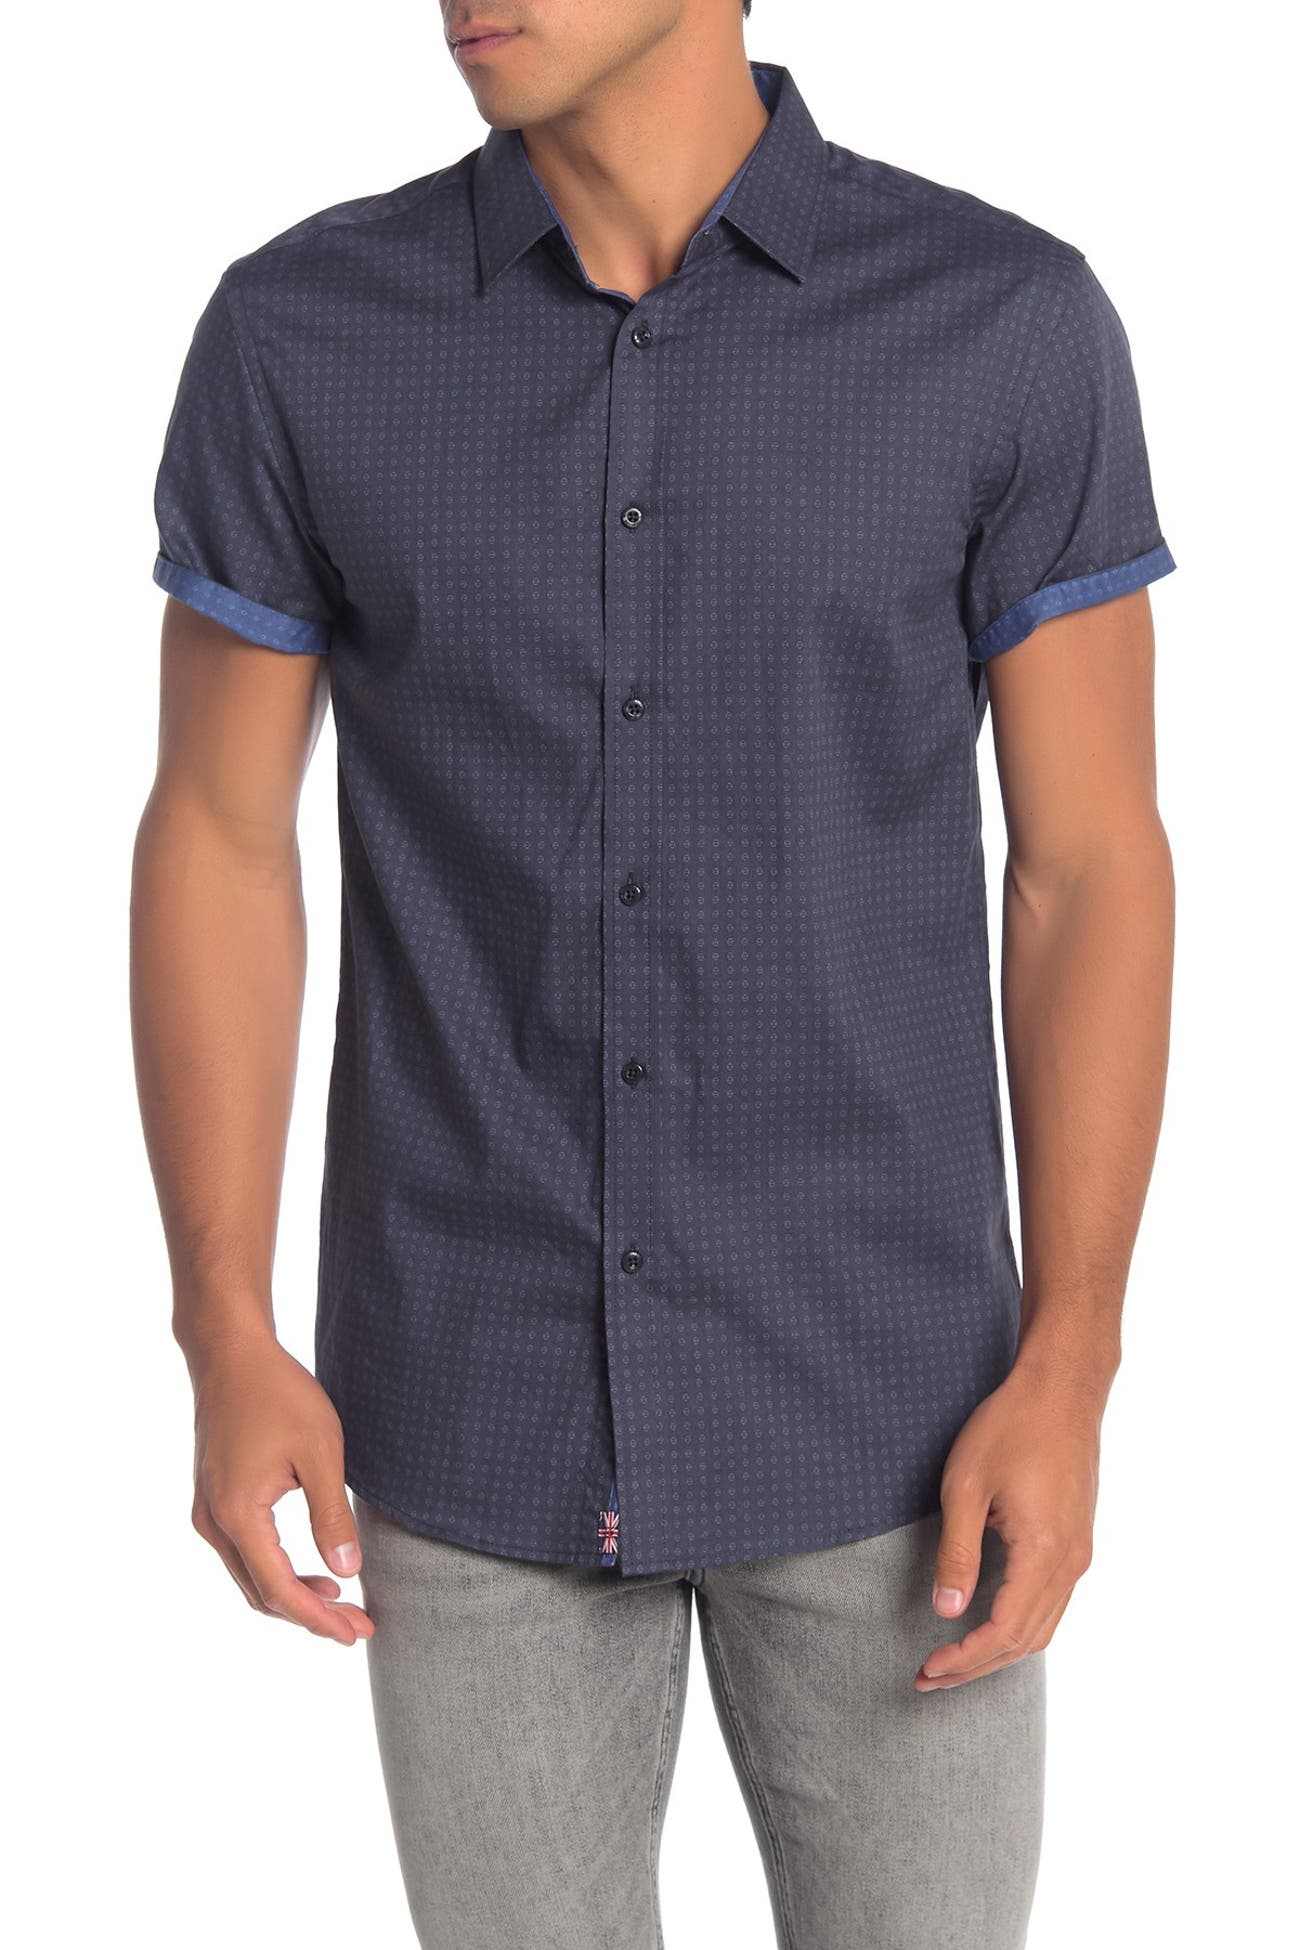 English Laundry | Patterned Short Sleeve Athletic Fit Shirt | Nordstrom ...